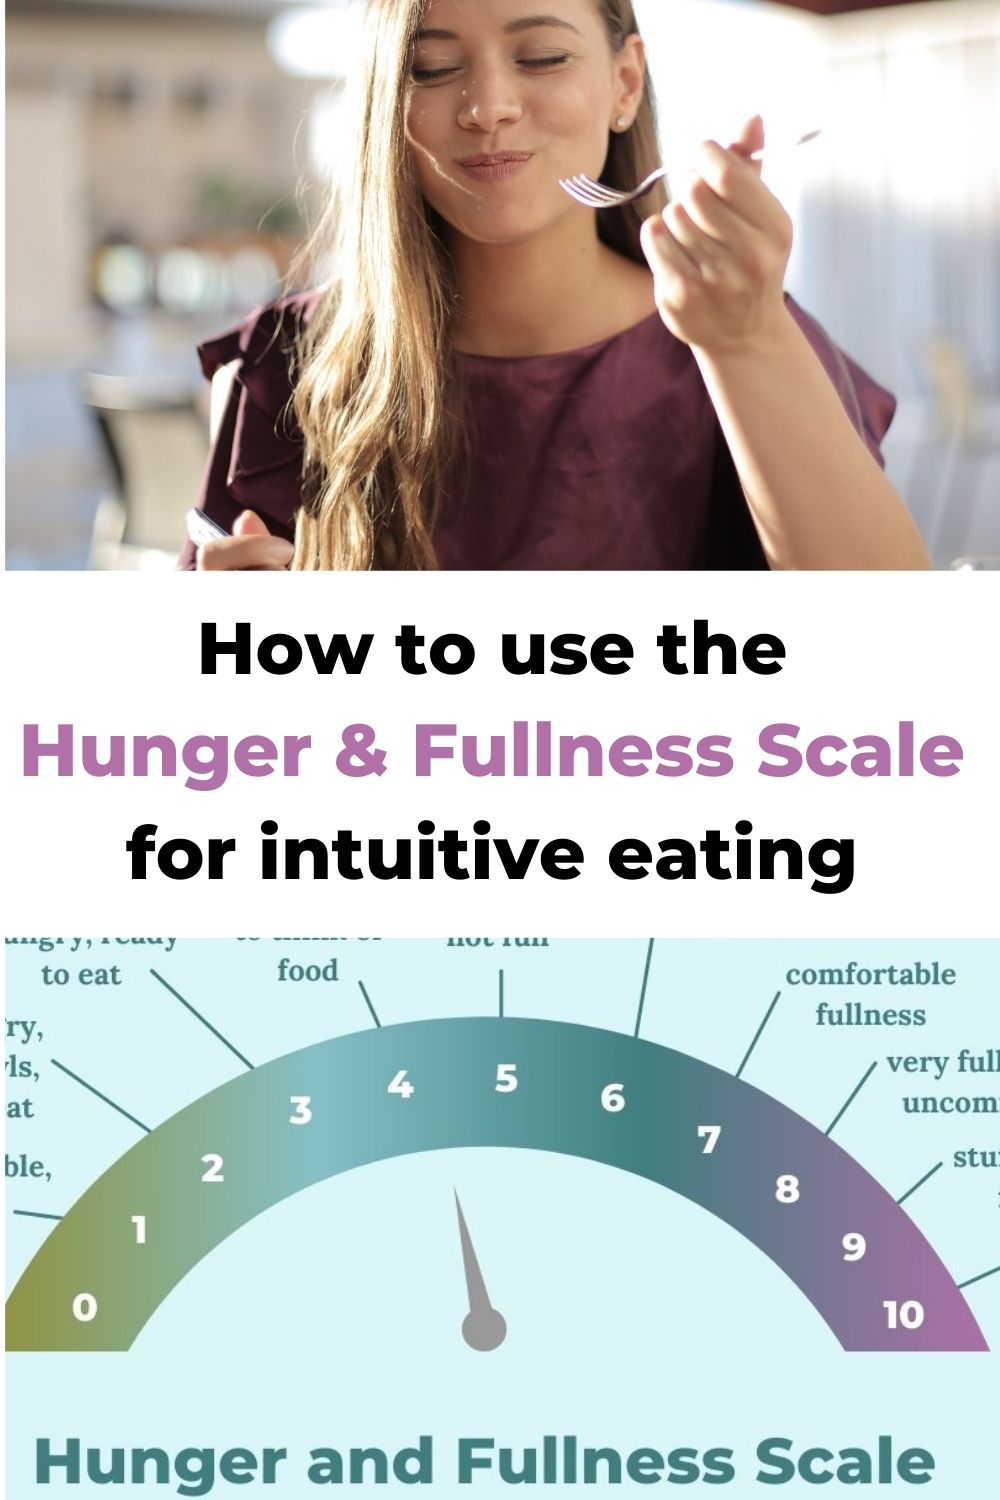 How to use the hunger and fullness scale for intuitive eating| top picture is woman eating ice and smiling\ bottom picture is the hunger scale. 